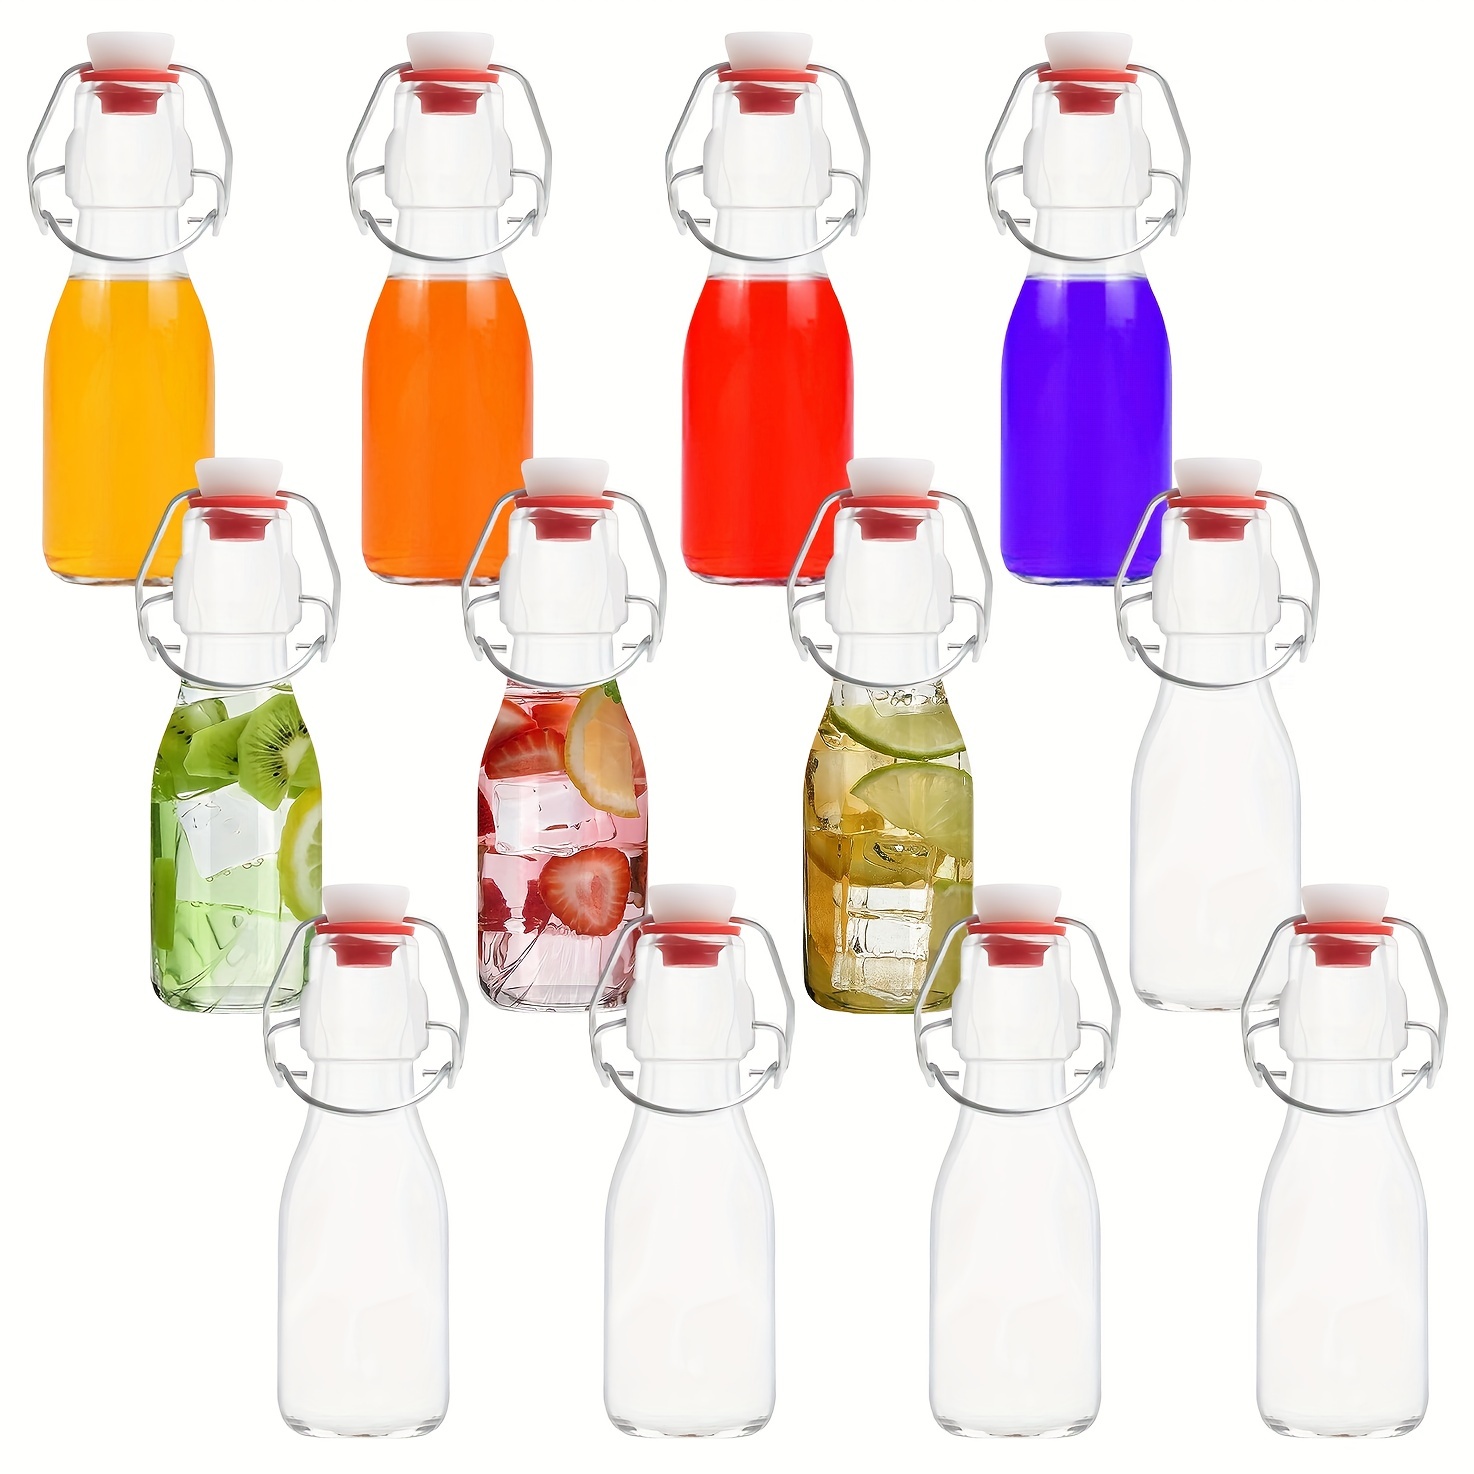 LOVLLE Glass Juice Shot Bottles with Caps - 8 Pack 3.5oz Small Clear Reusable Jars with Lids for Juicing Beverage Storage Liquids with Brush and